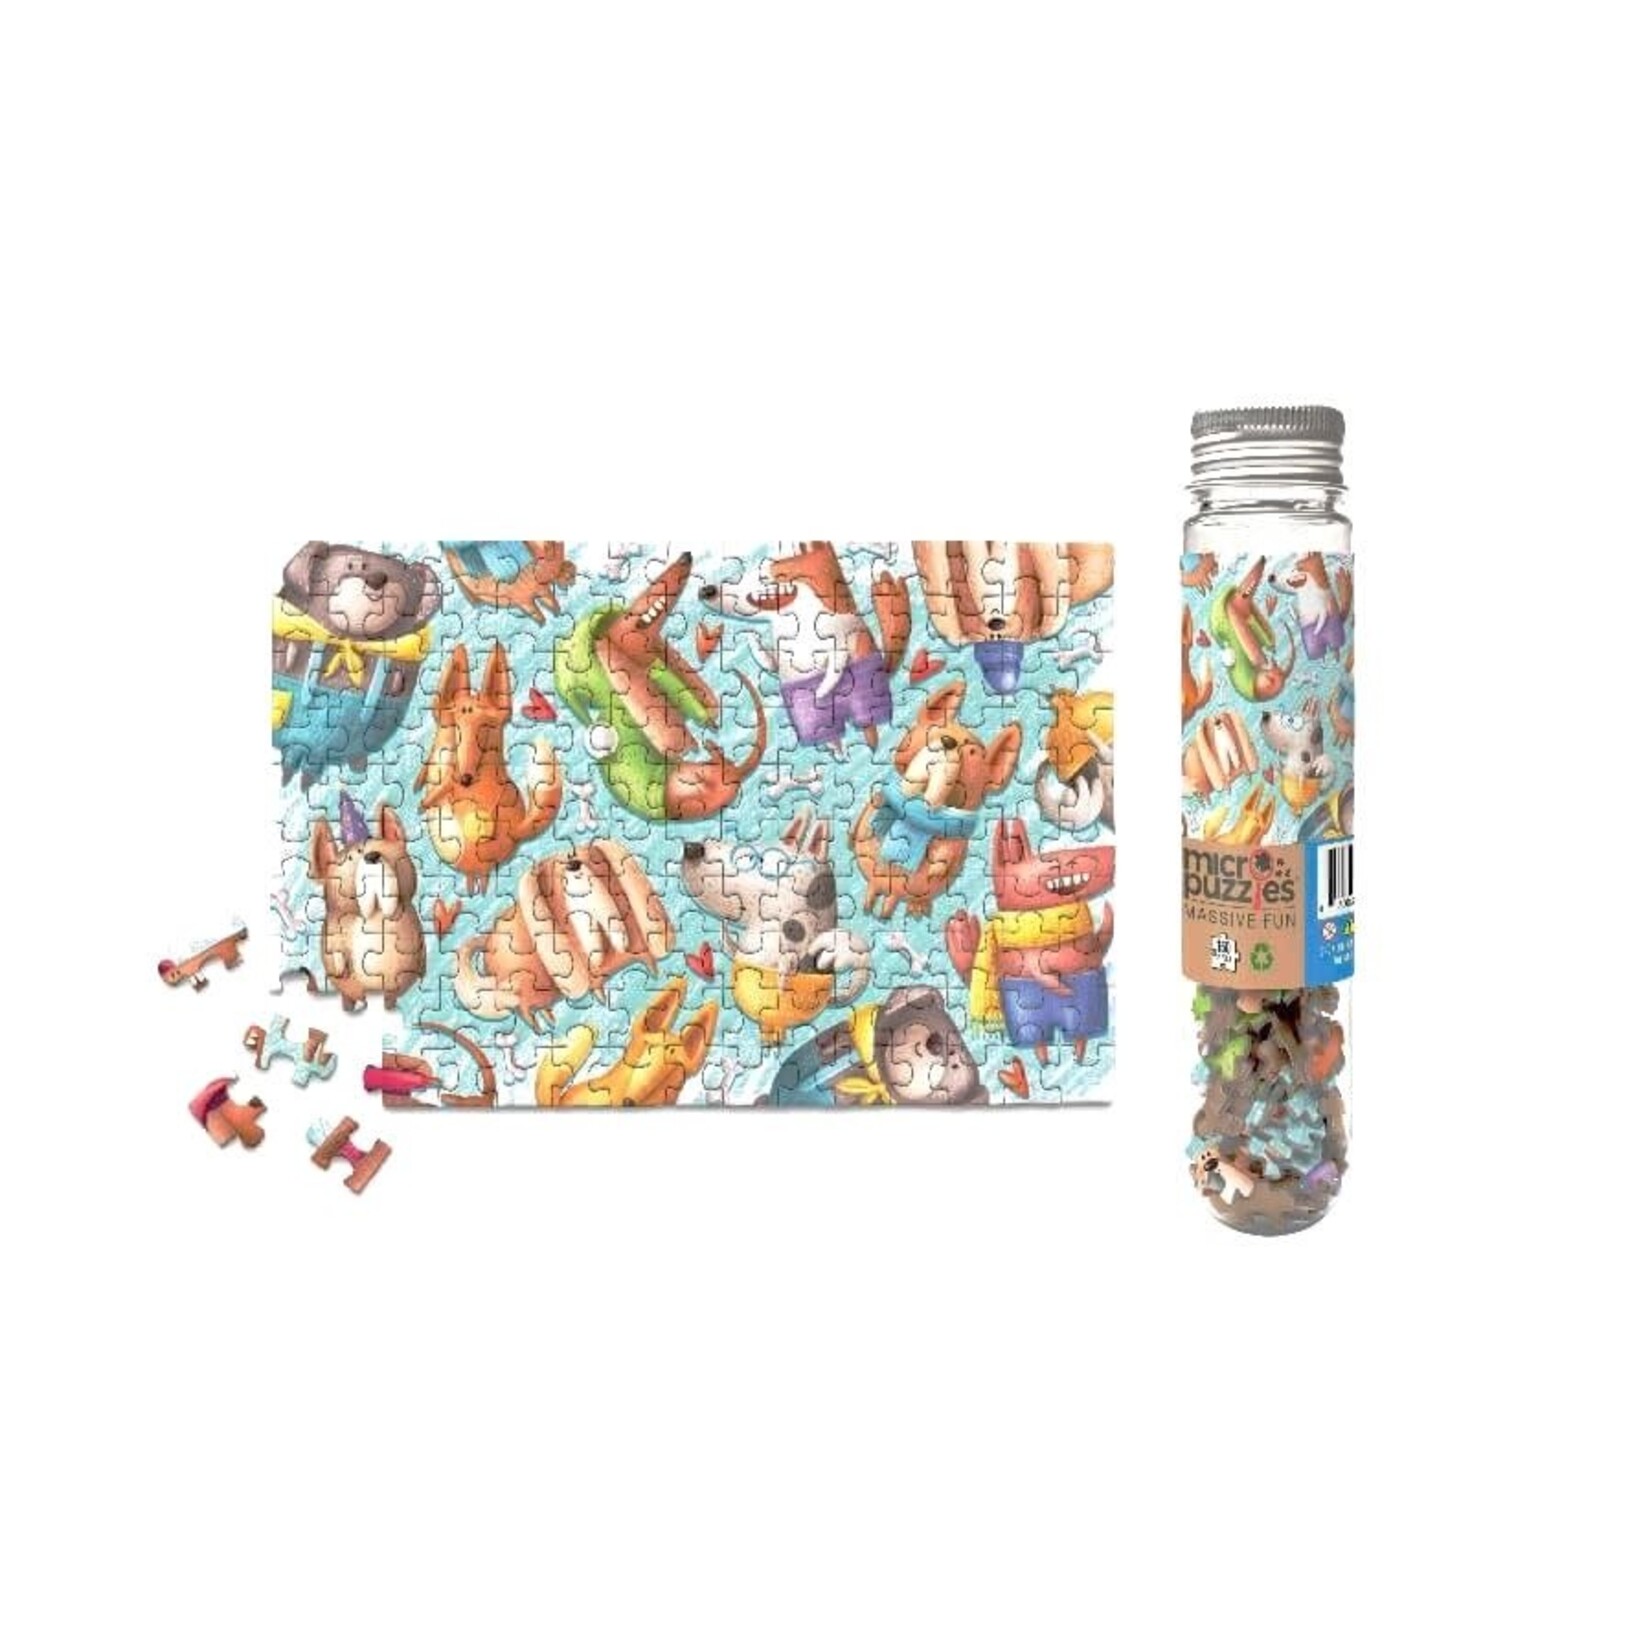 MicroPuzzles MicroPuzzles: Dog Gone It - 150 Piece Mini Jigsaw Puzzle